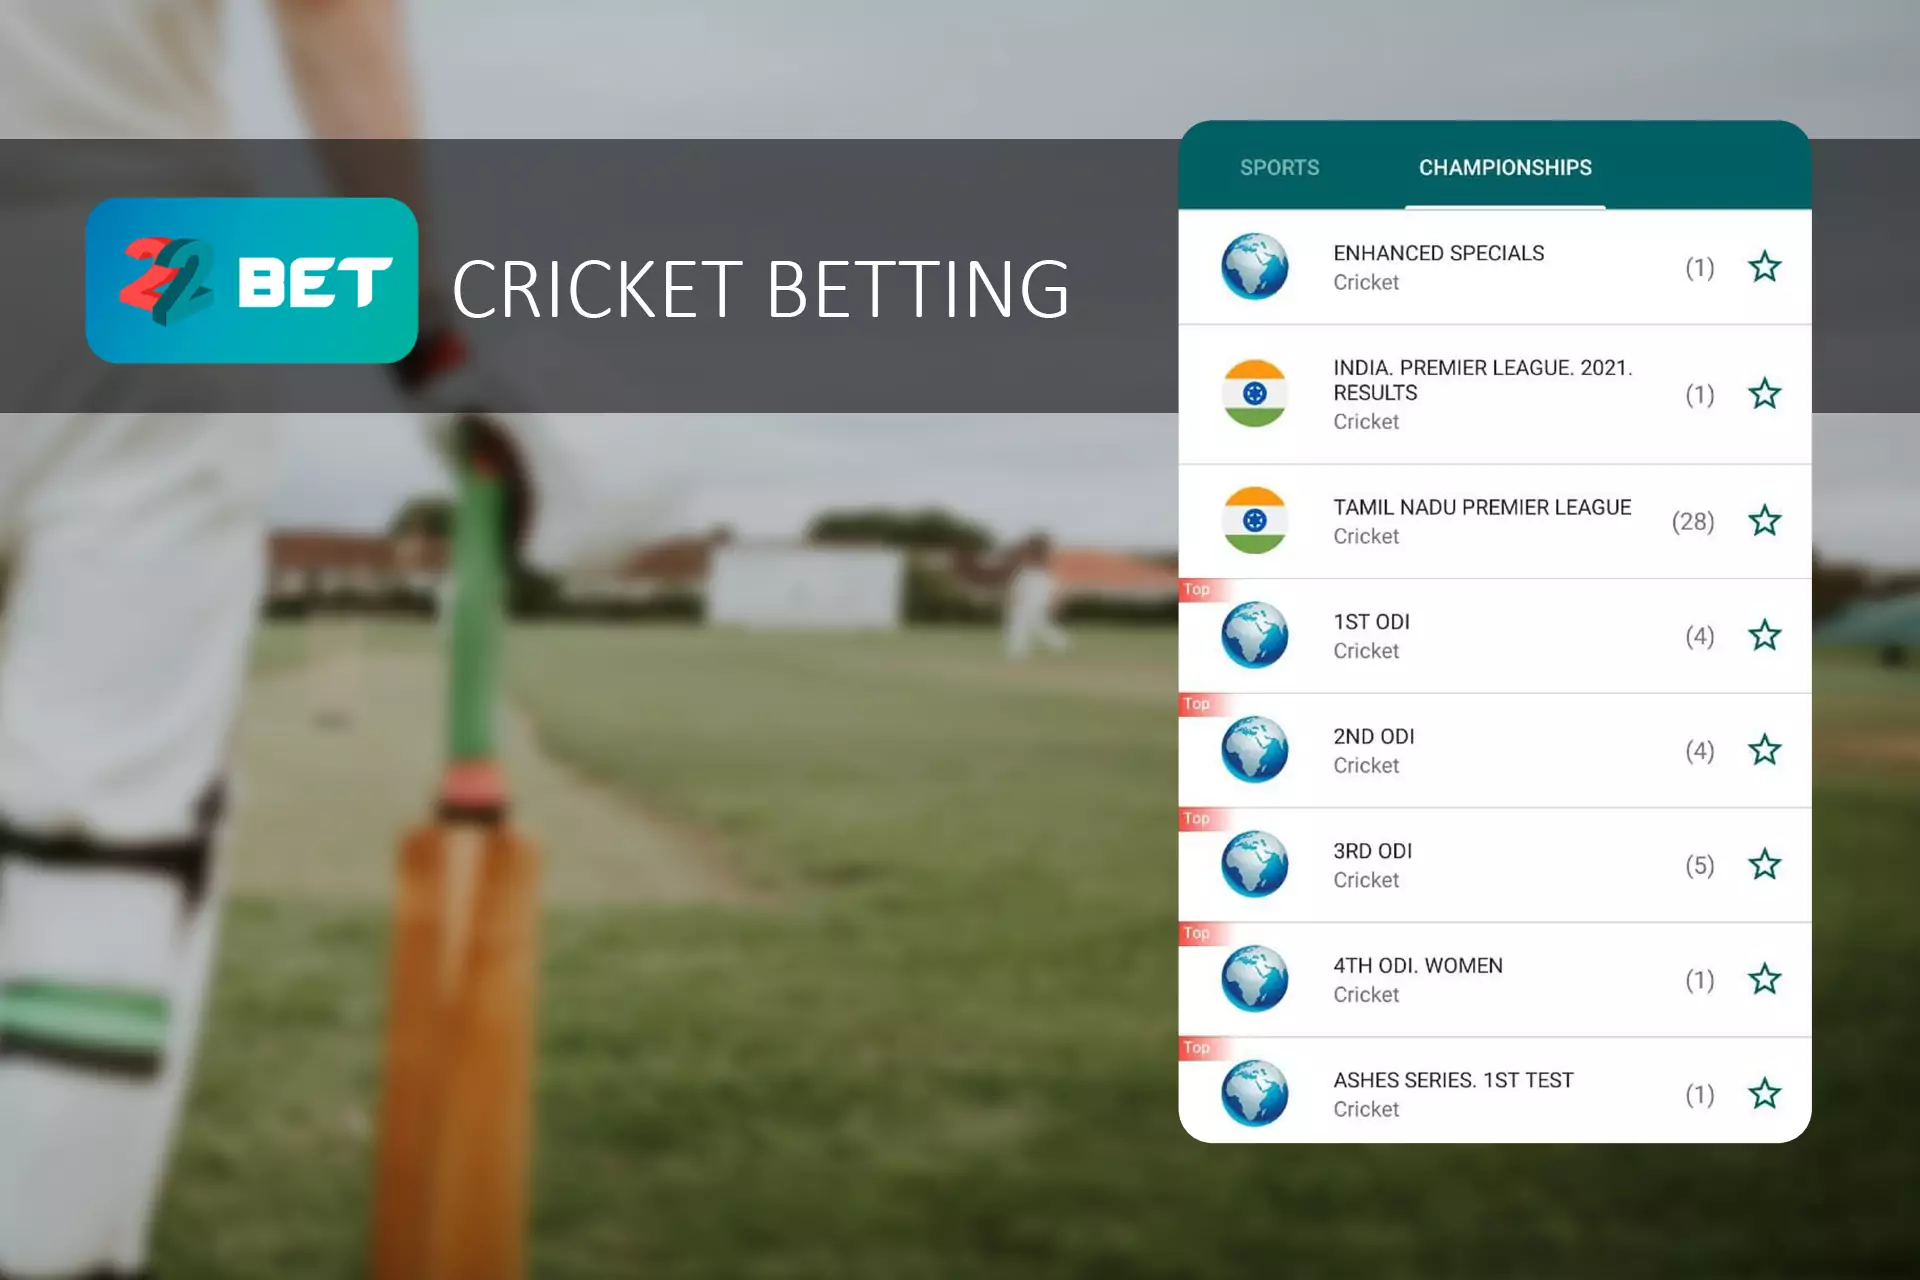 Choose a championship and match in the cricket section of the app.